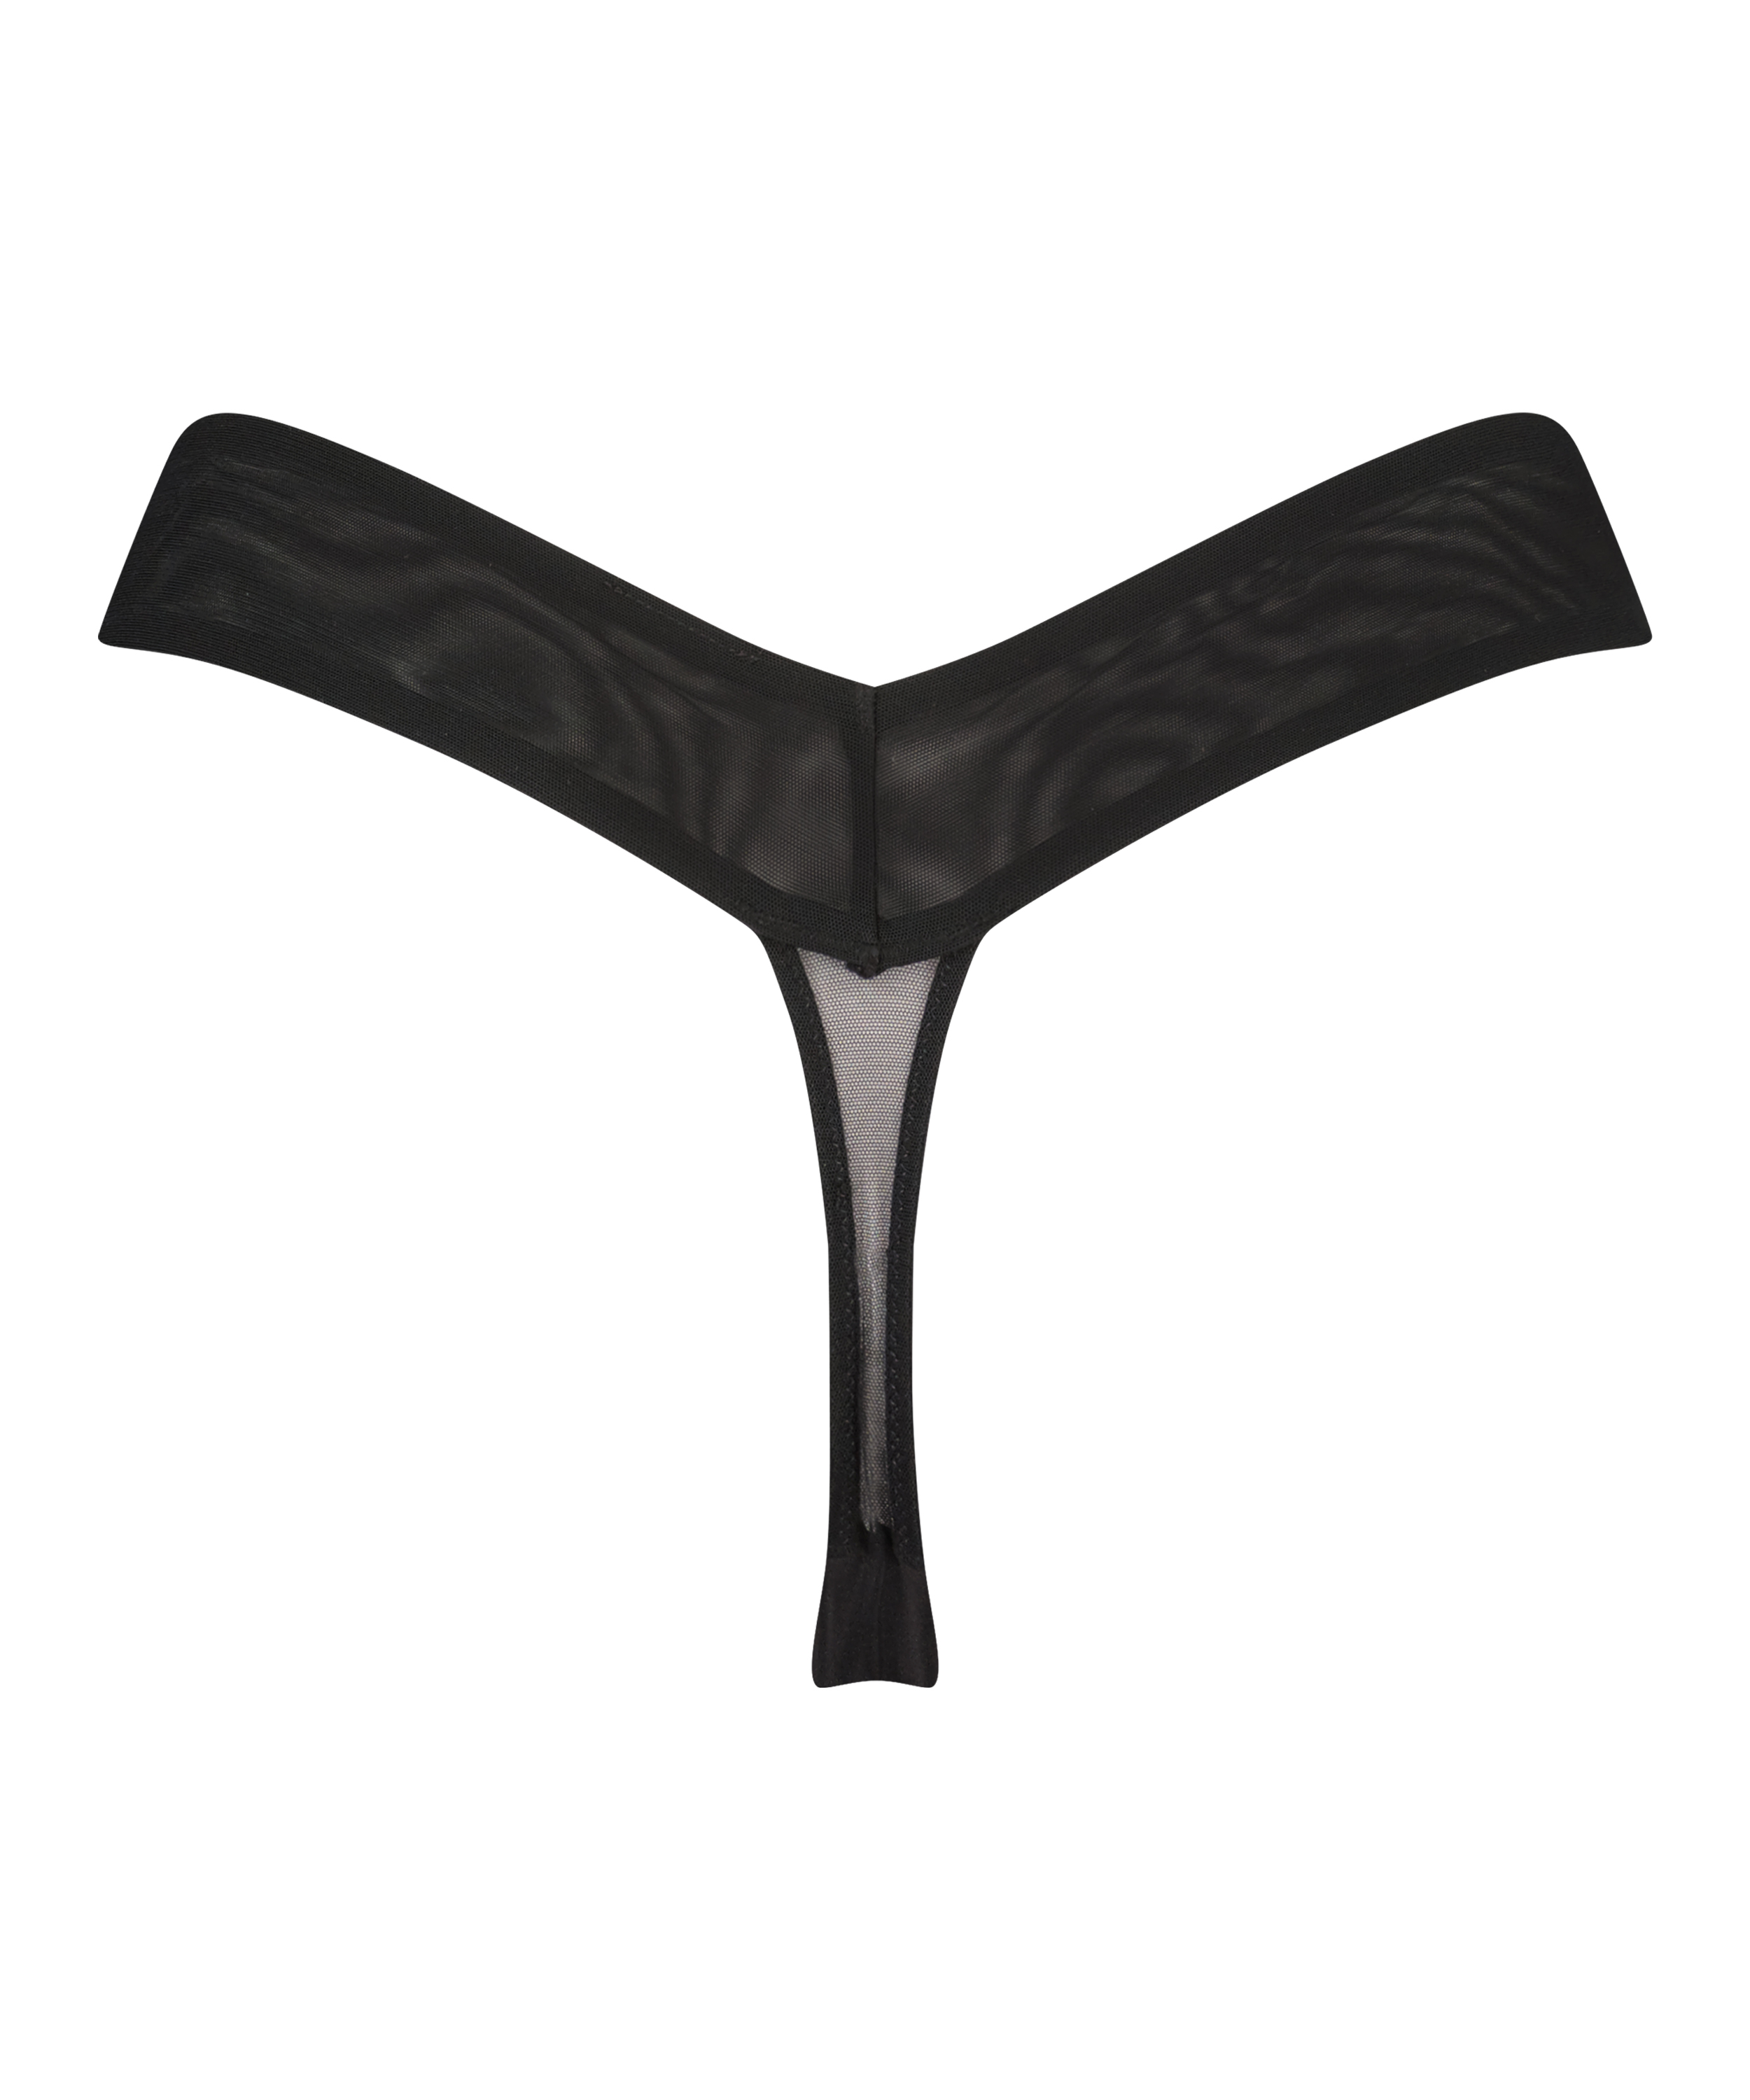 String taille extra basse Daphne, Noir, main